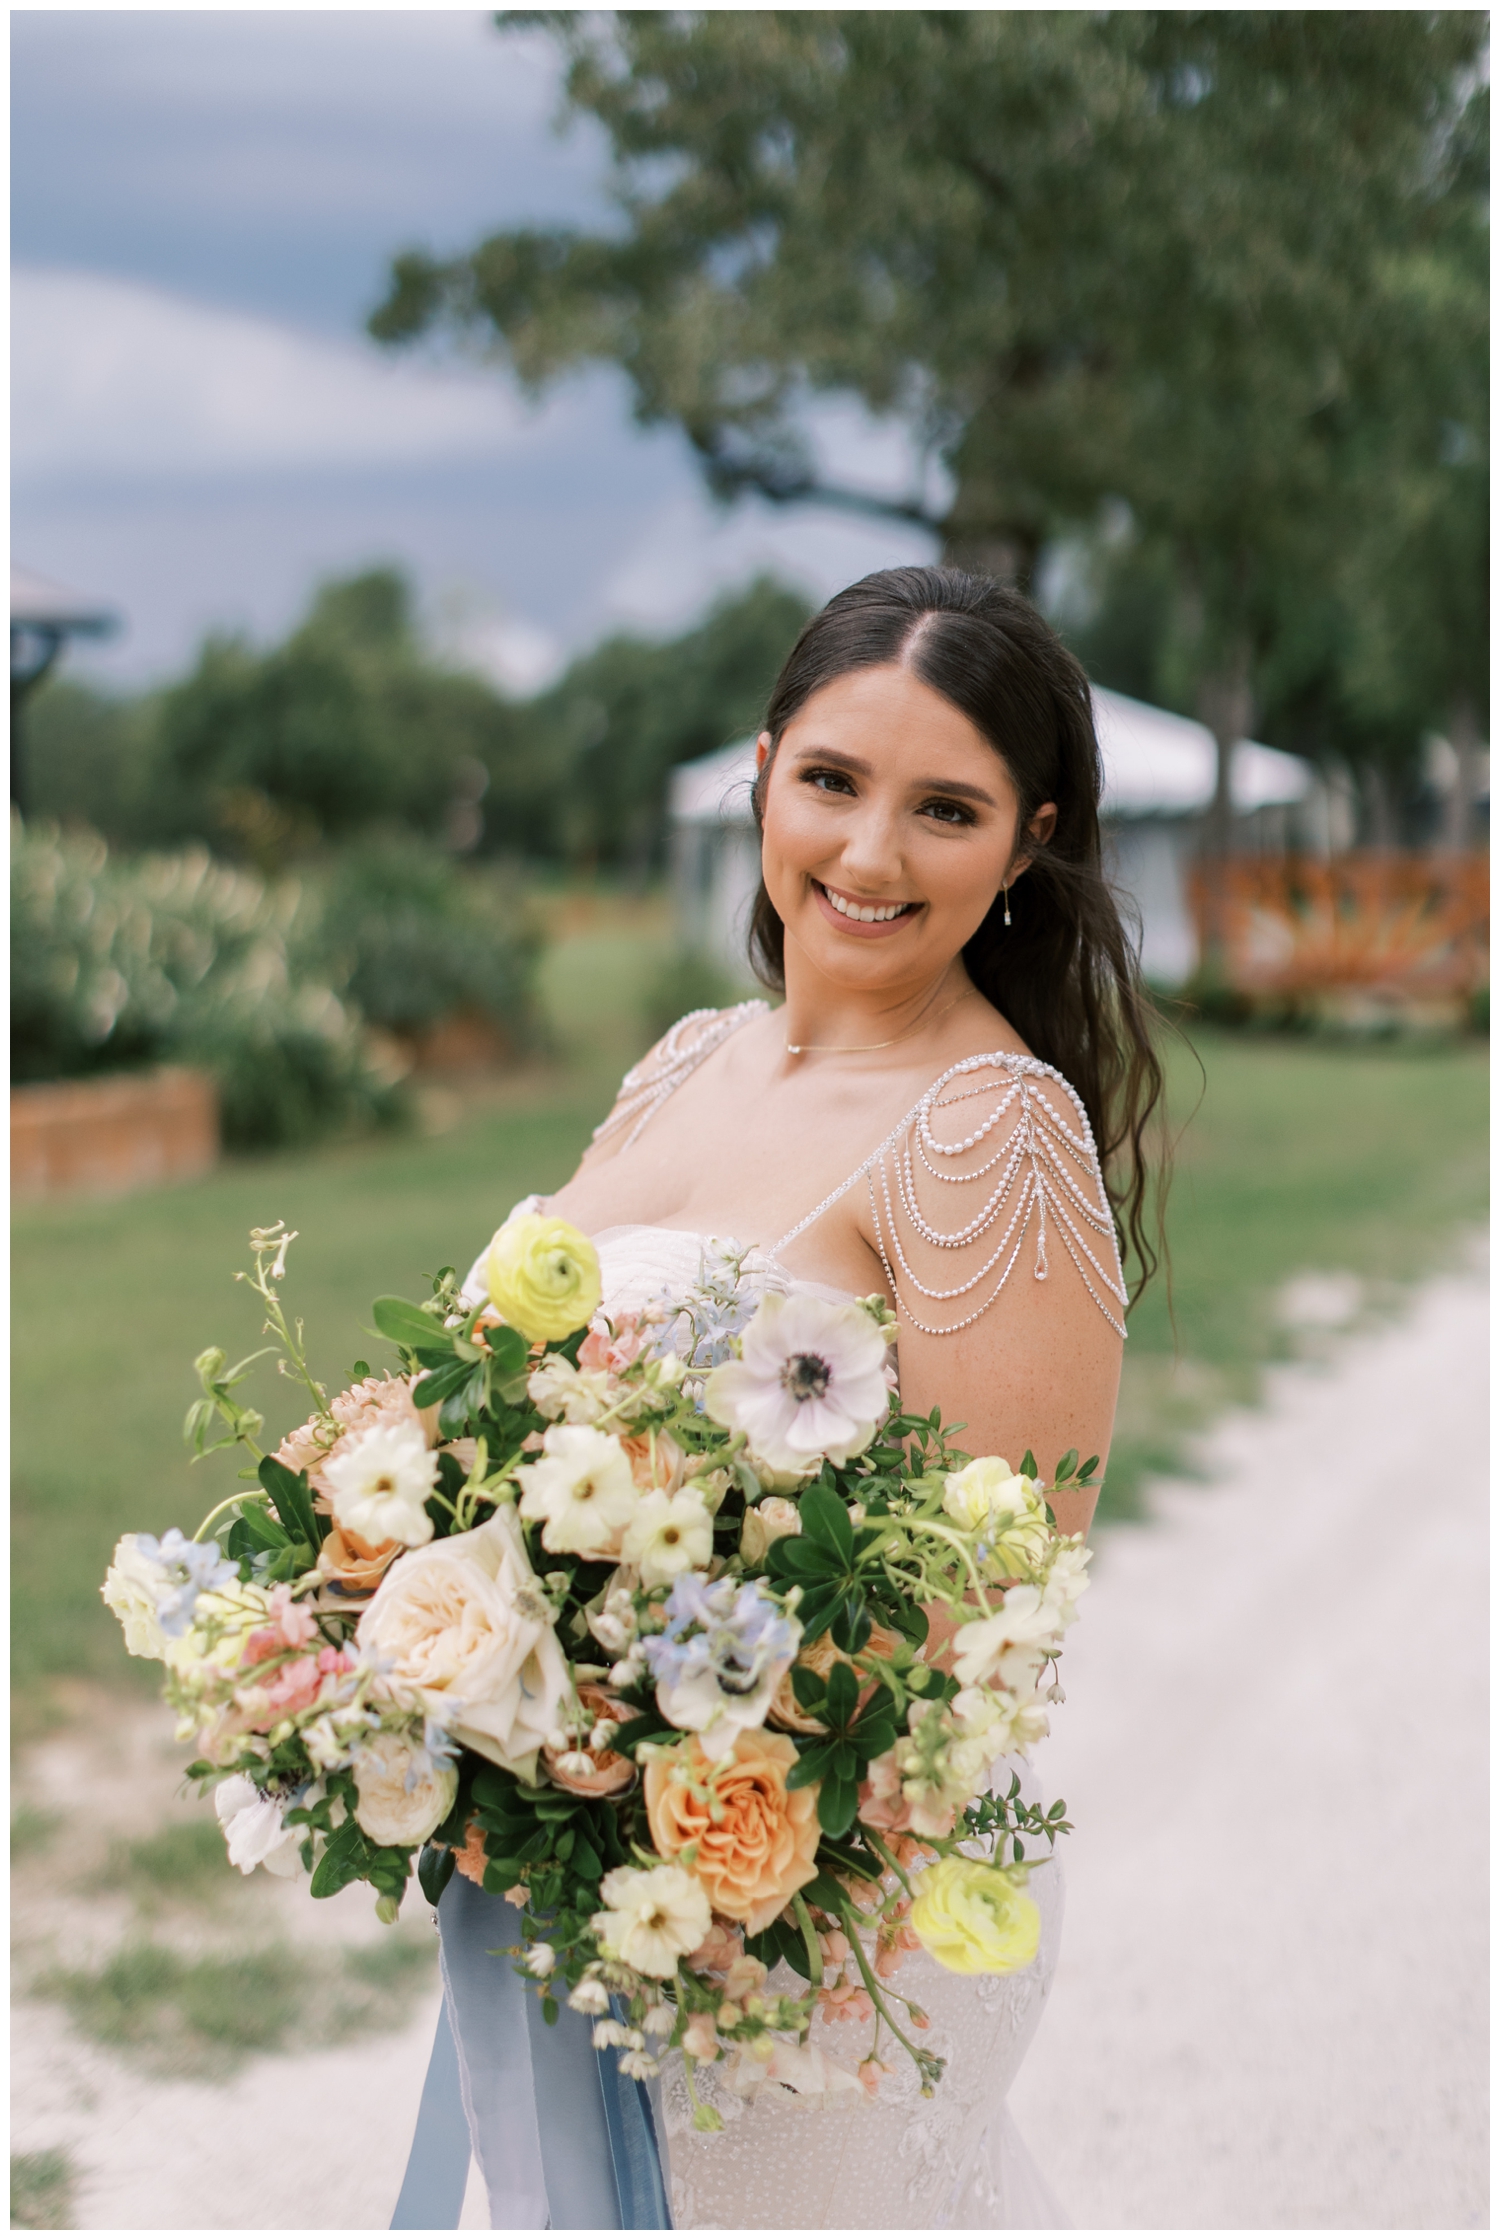 bride holding blue peach and white floral bouquet and smiling